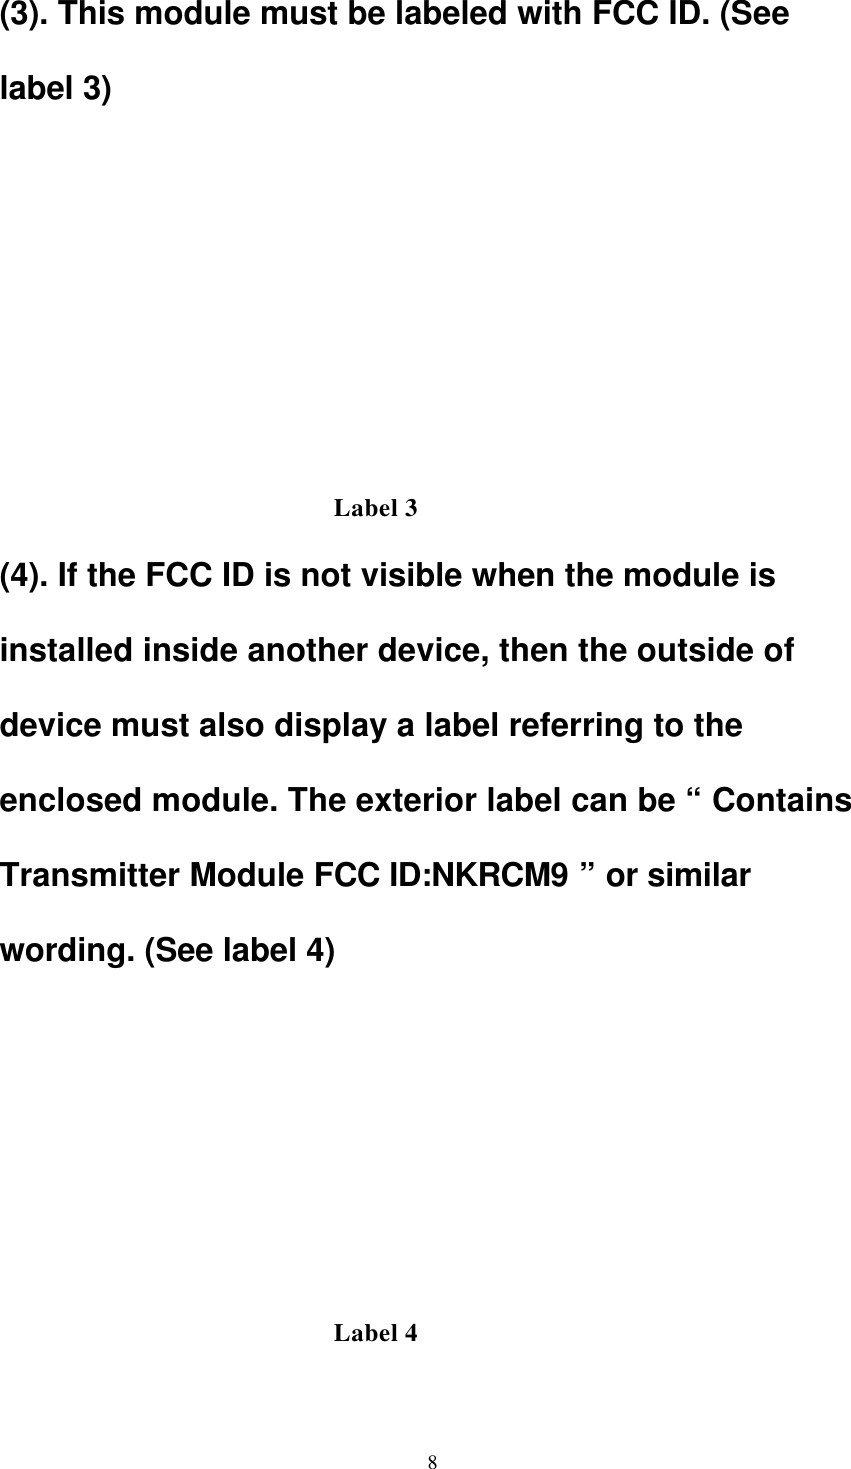  8(3). This module must be labeled with FCC ID. (See label 3)           (4). If the FCC ID is not visible when the module is installed inside another device, then the outside of device must also display a label referring to the enclosed module. The exterior label can be “ Contains Transmitter Module FCC ID:NKRCM9 ” or similar wording. (See label 4)       Label 3 Label 4 